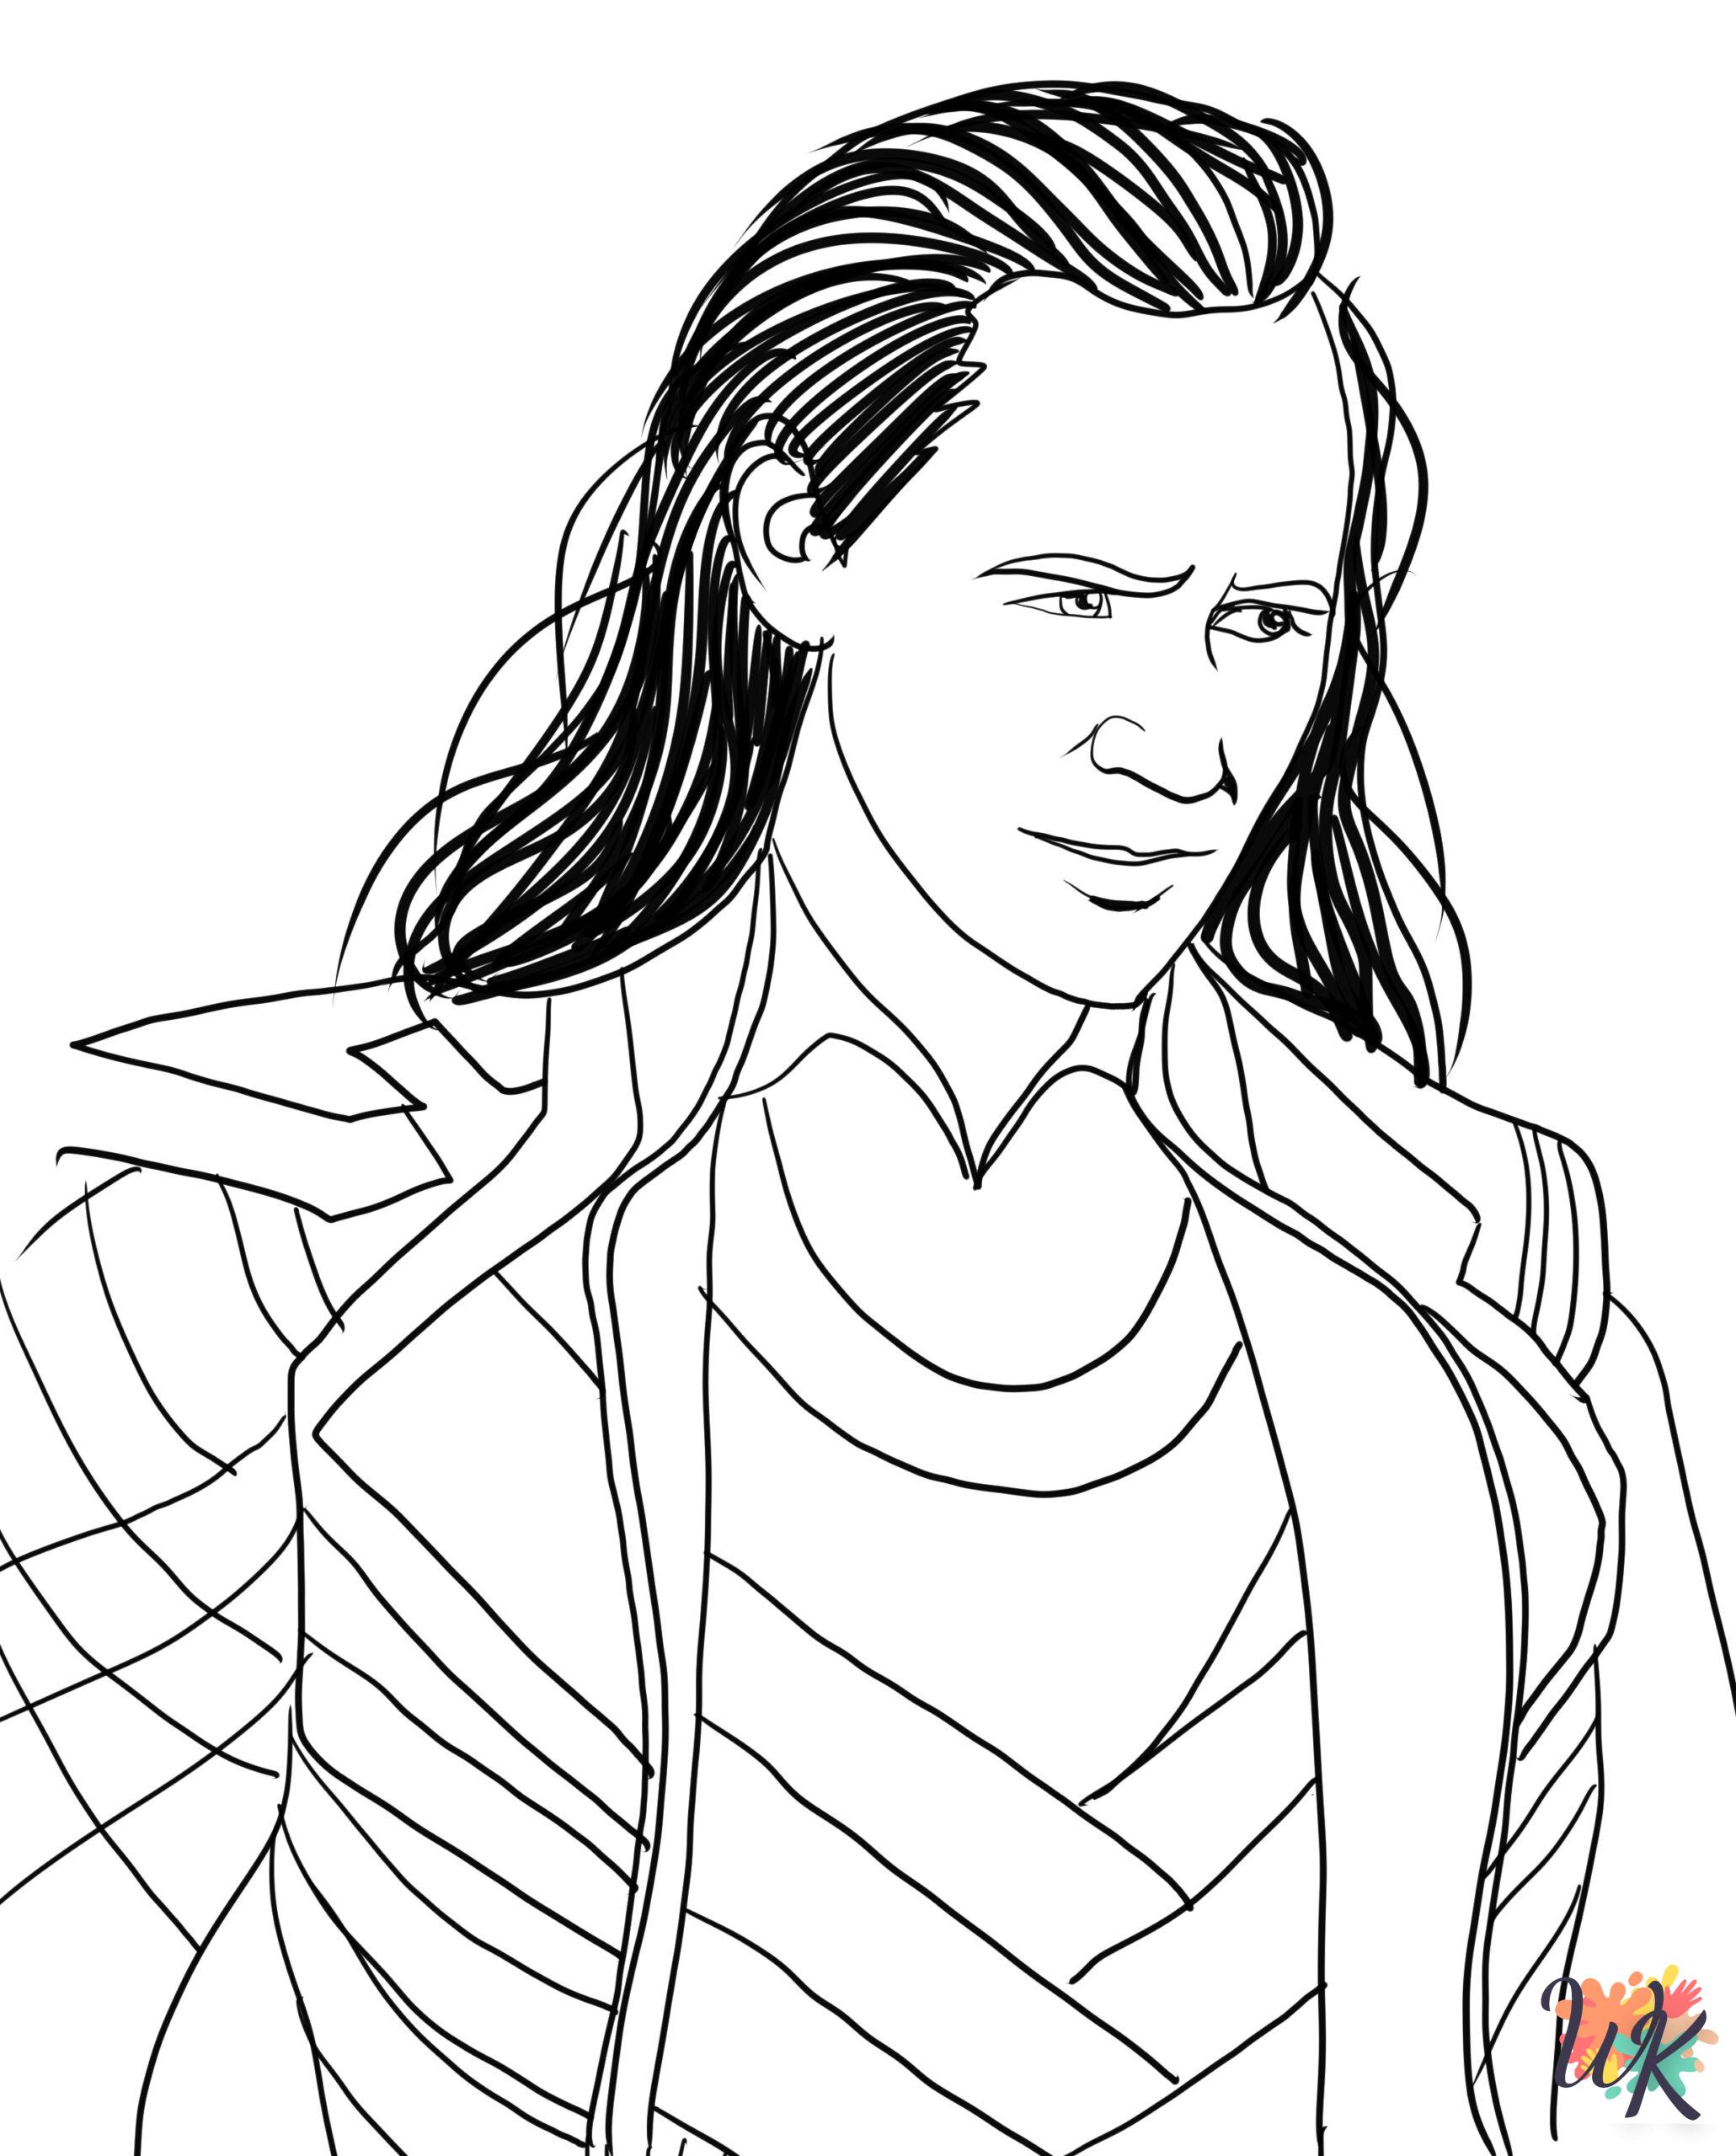 Loki ornament coloring pages